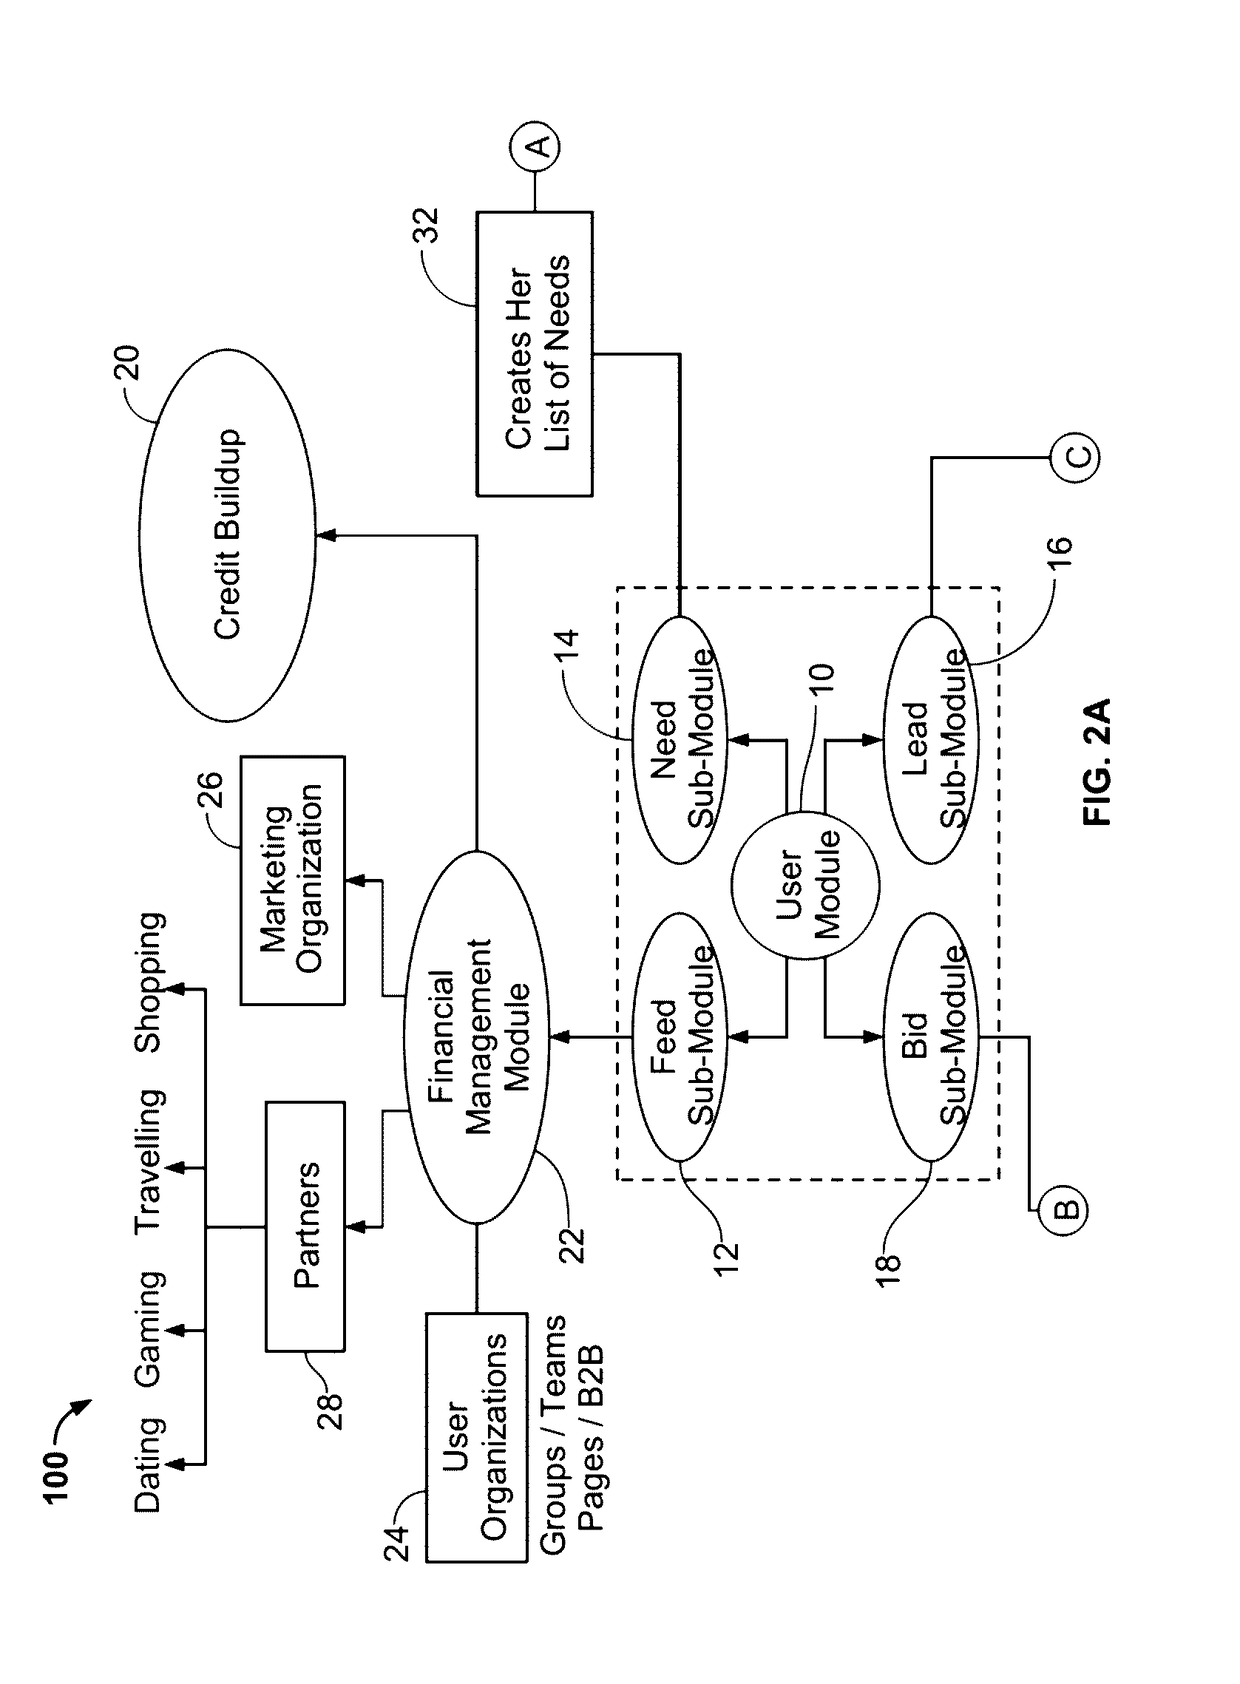 Systems and methods for an intelligent online social commercial network